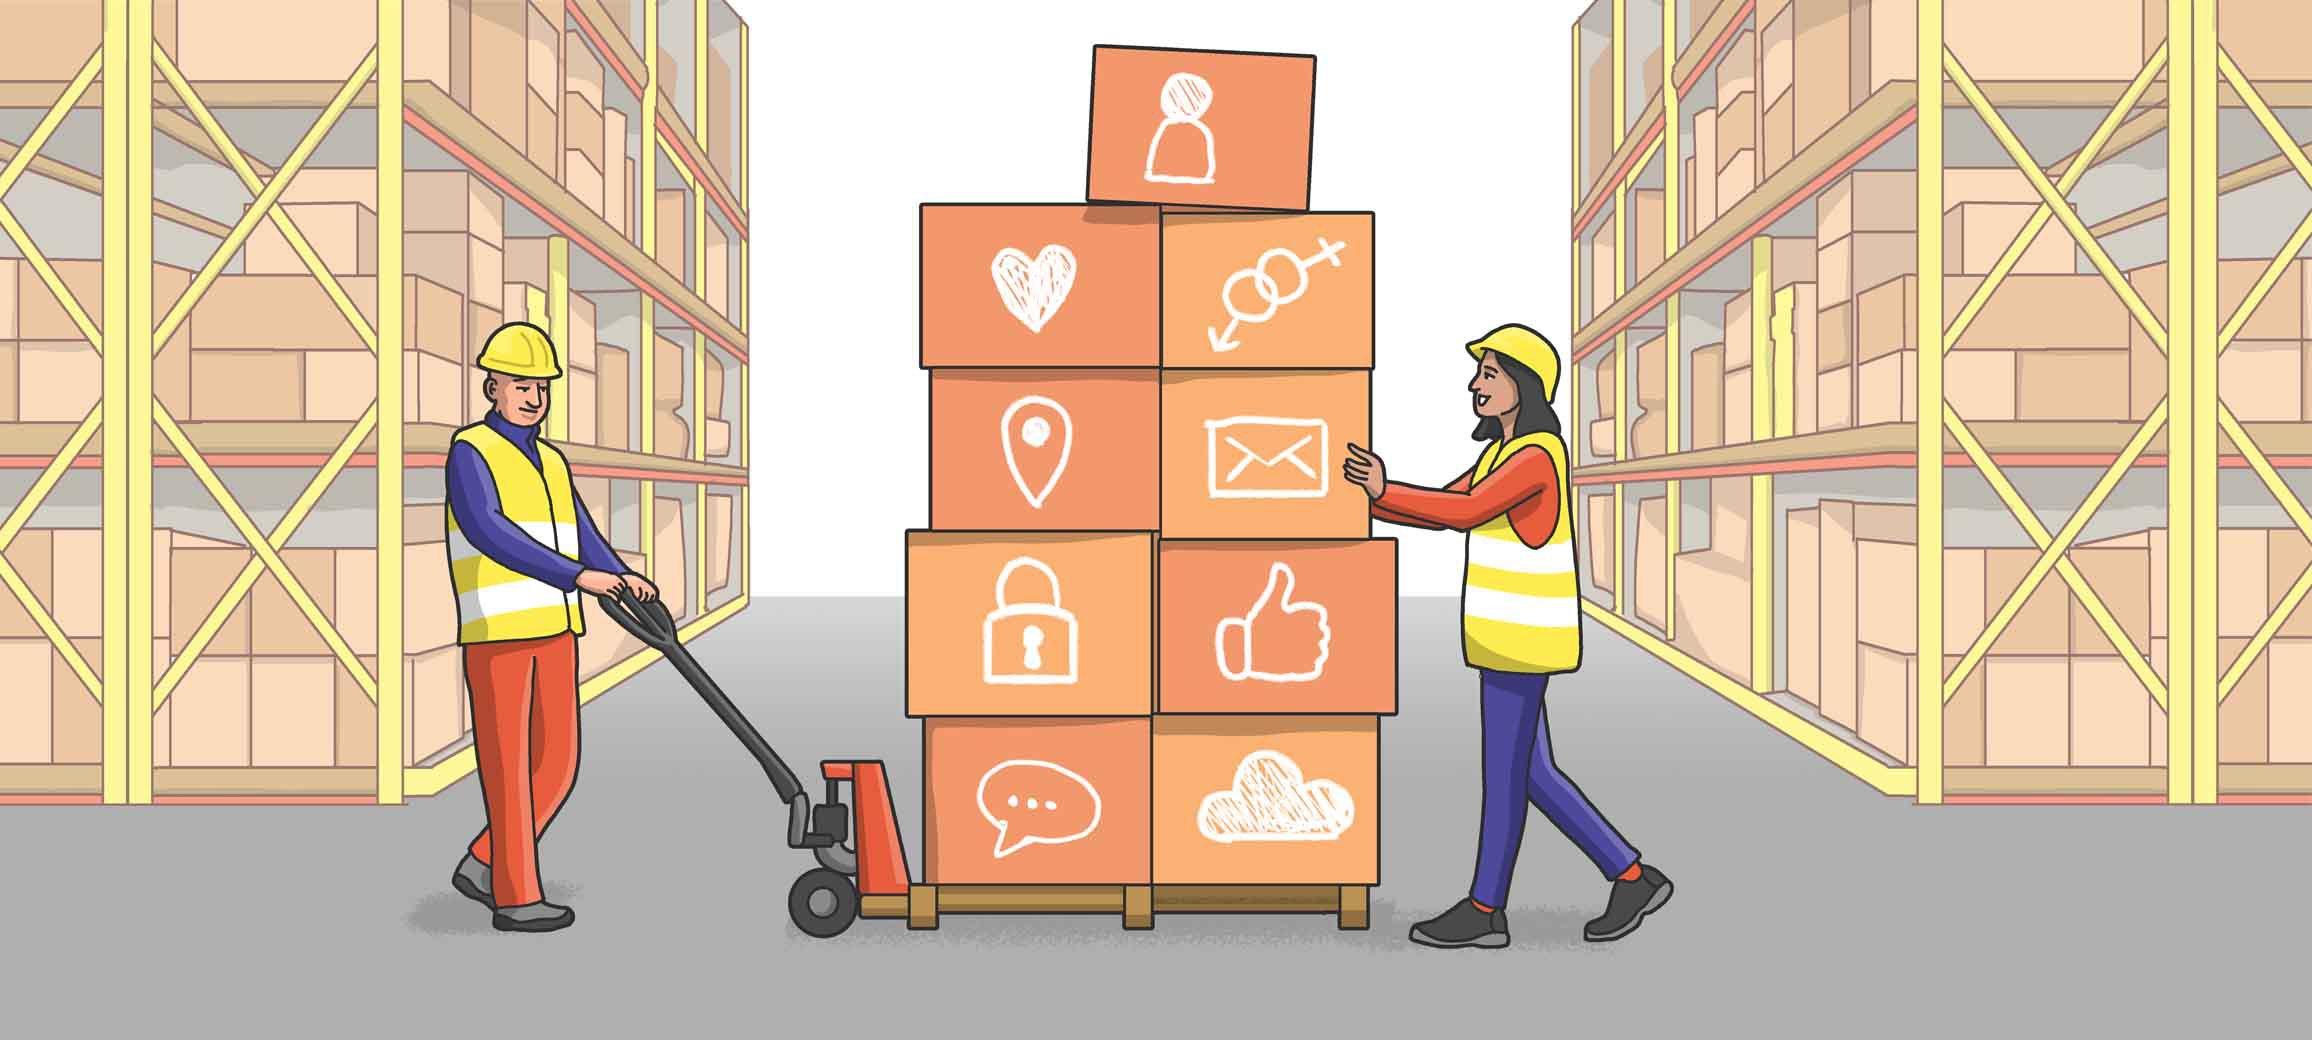 People in warehouse moving boxes of personal information - likes, location, social media data